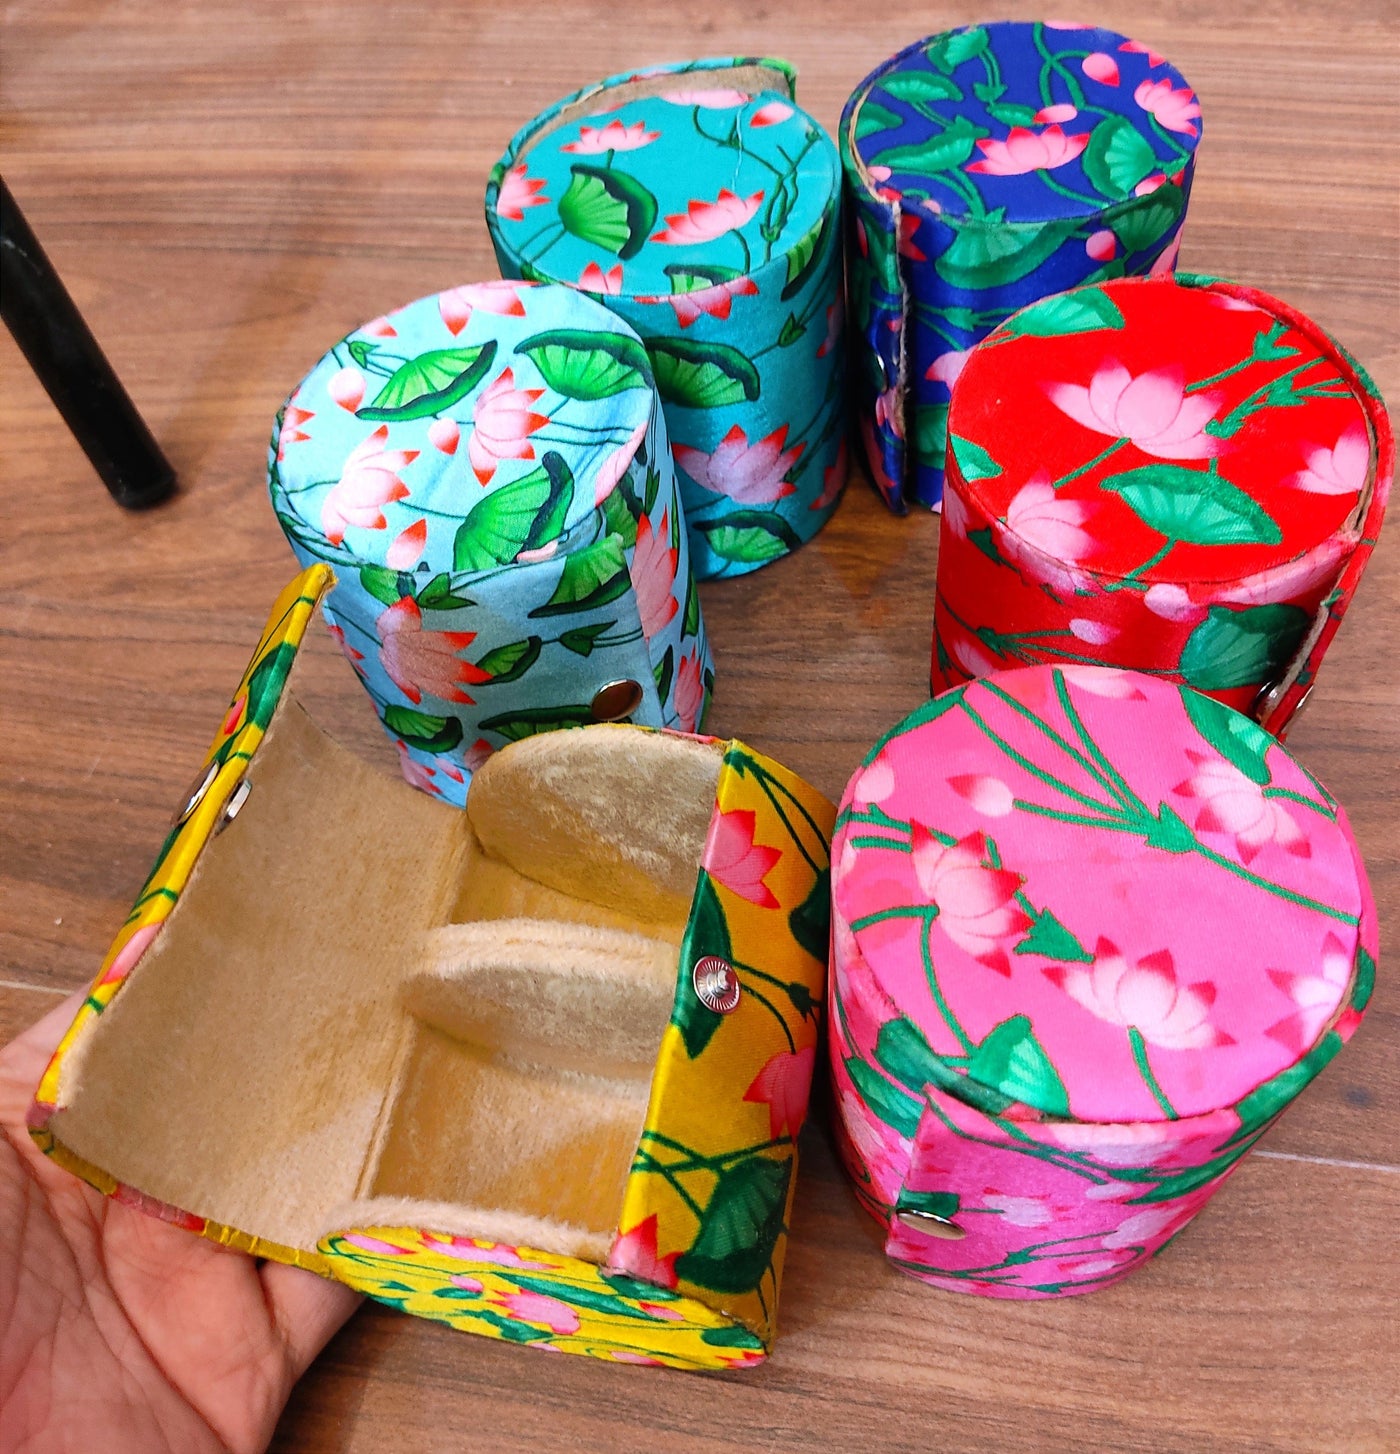 100 Rs each on buying 🏷in bulk | Call 📞 at 8619550223 Bangles Box LAMANSH® 4 inch Width Pichwai Print Bangle Boxes for Wedding Favors 🎁 | Gift Boxes for Bridesmaids